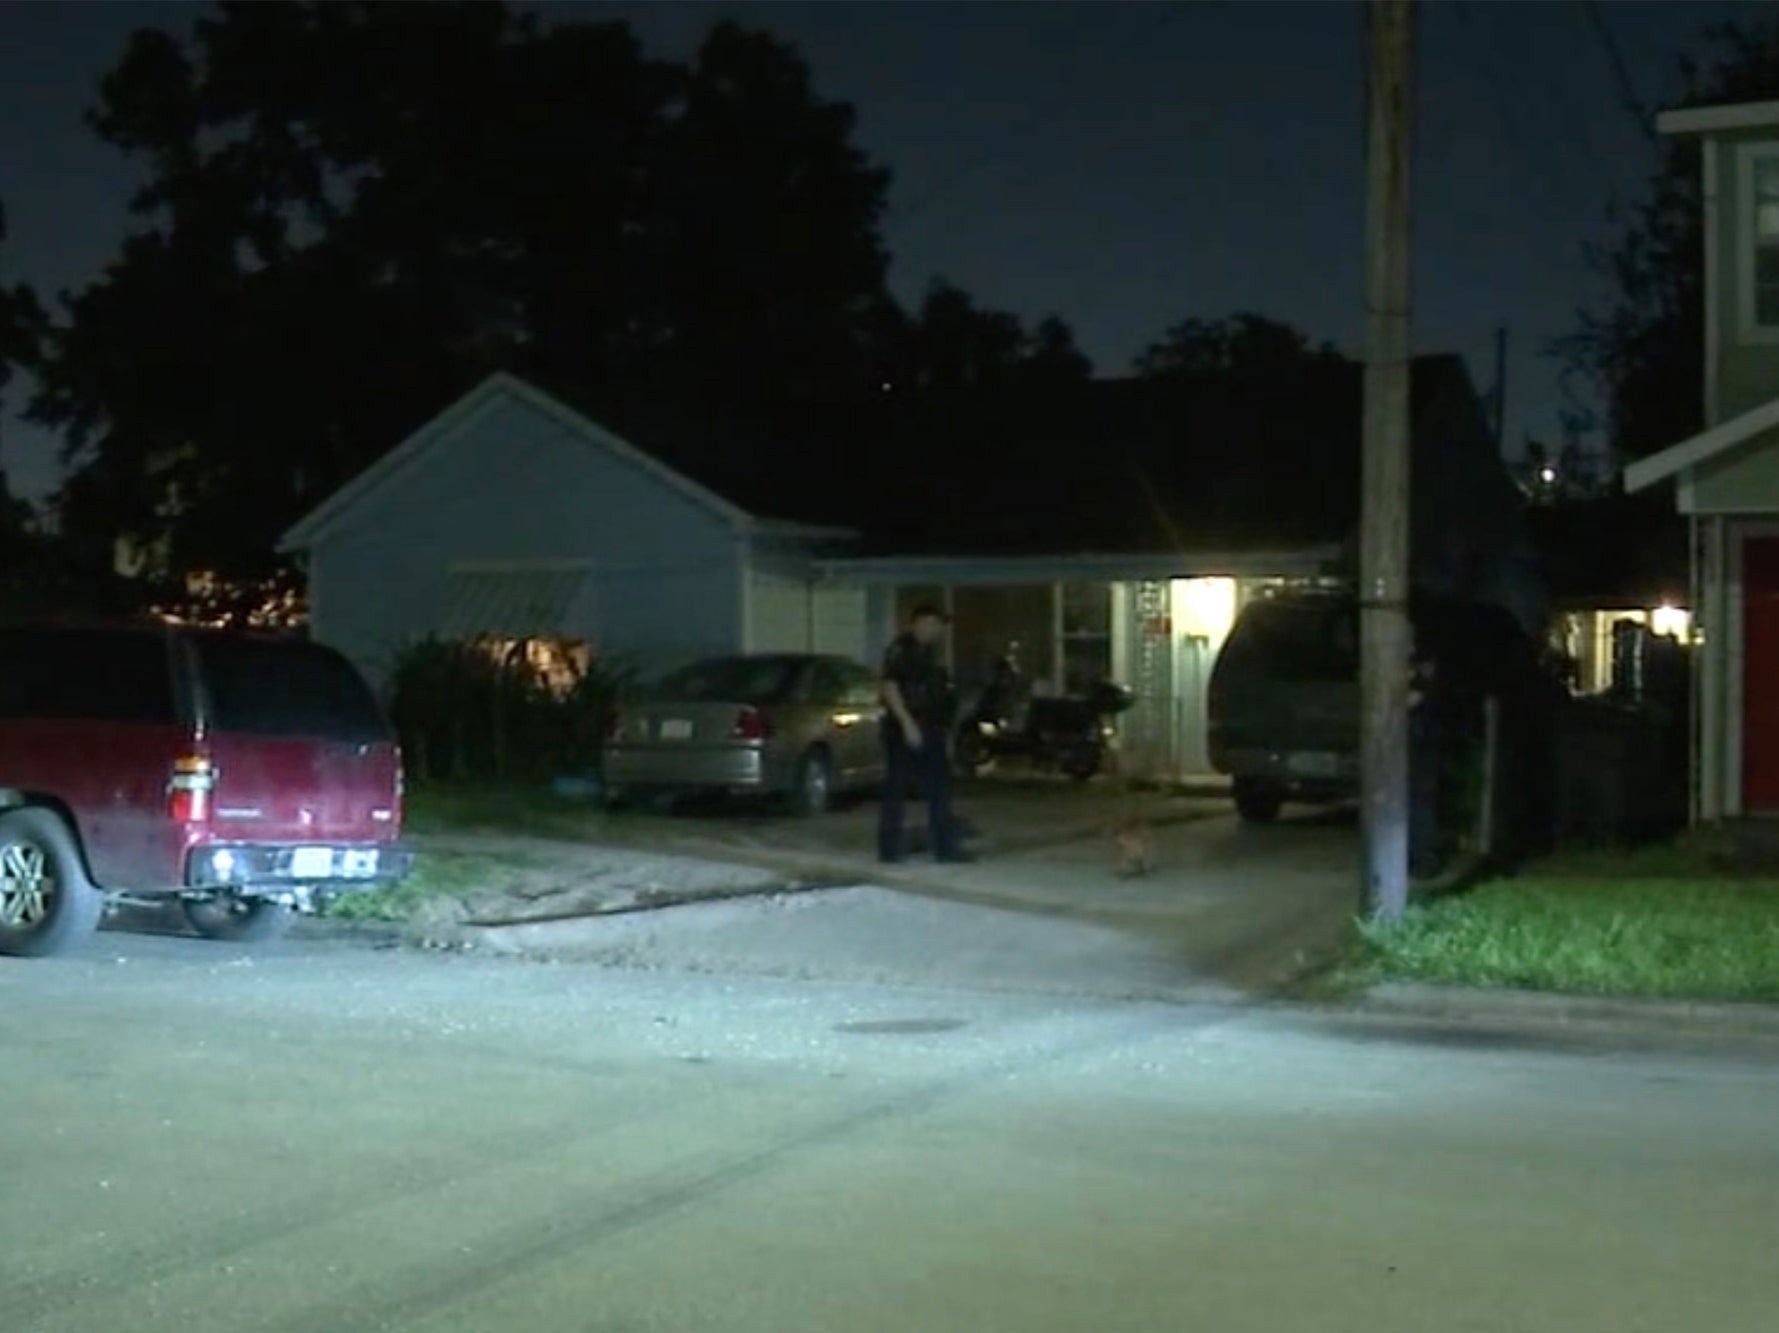 A boy was accidentally shot by his father in eastern Houston on Friday night.